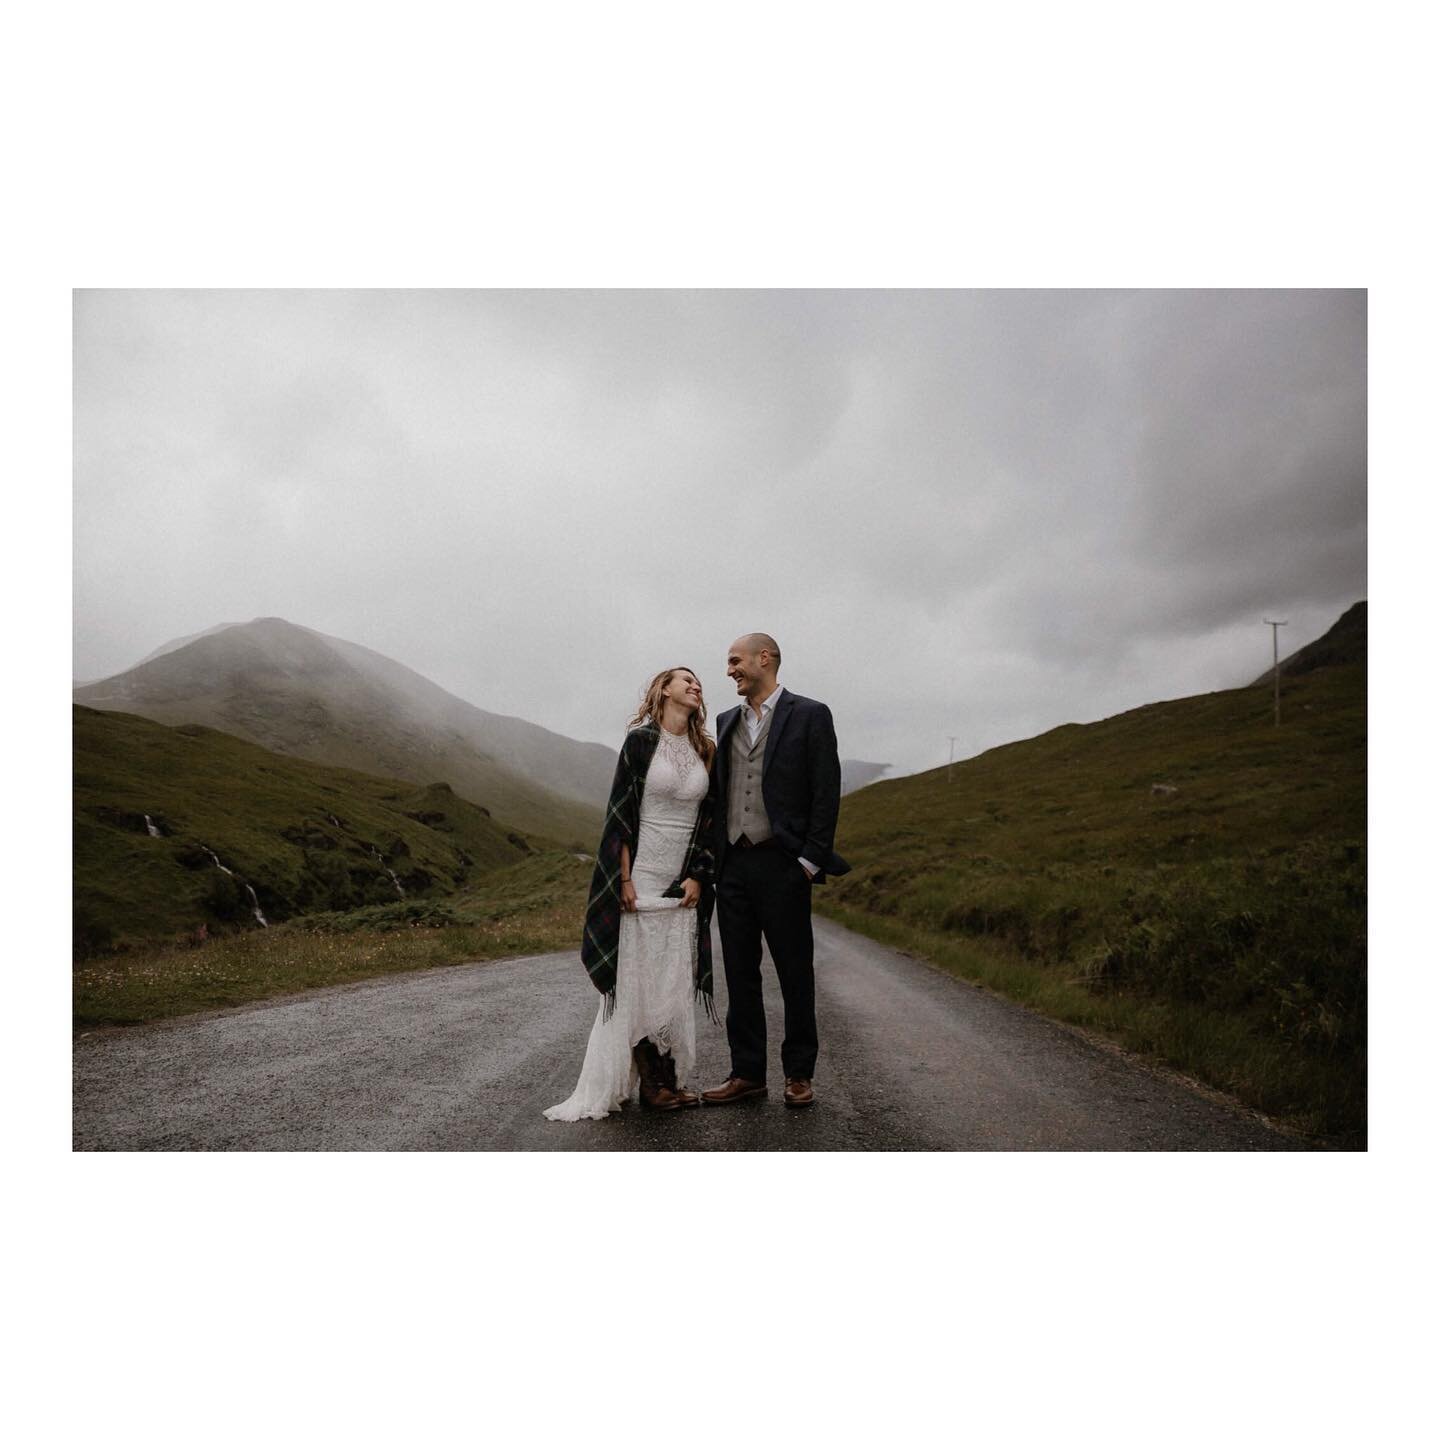 This is how happy you could be if you elope in Glencoe.  Not that I&rsquo;m trying to persuade you in any way.